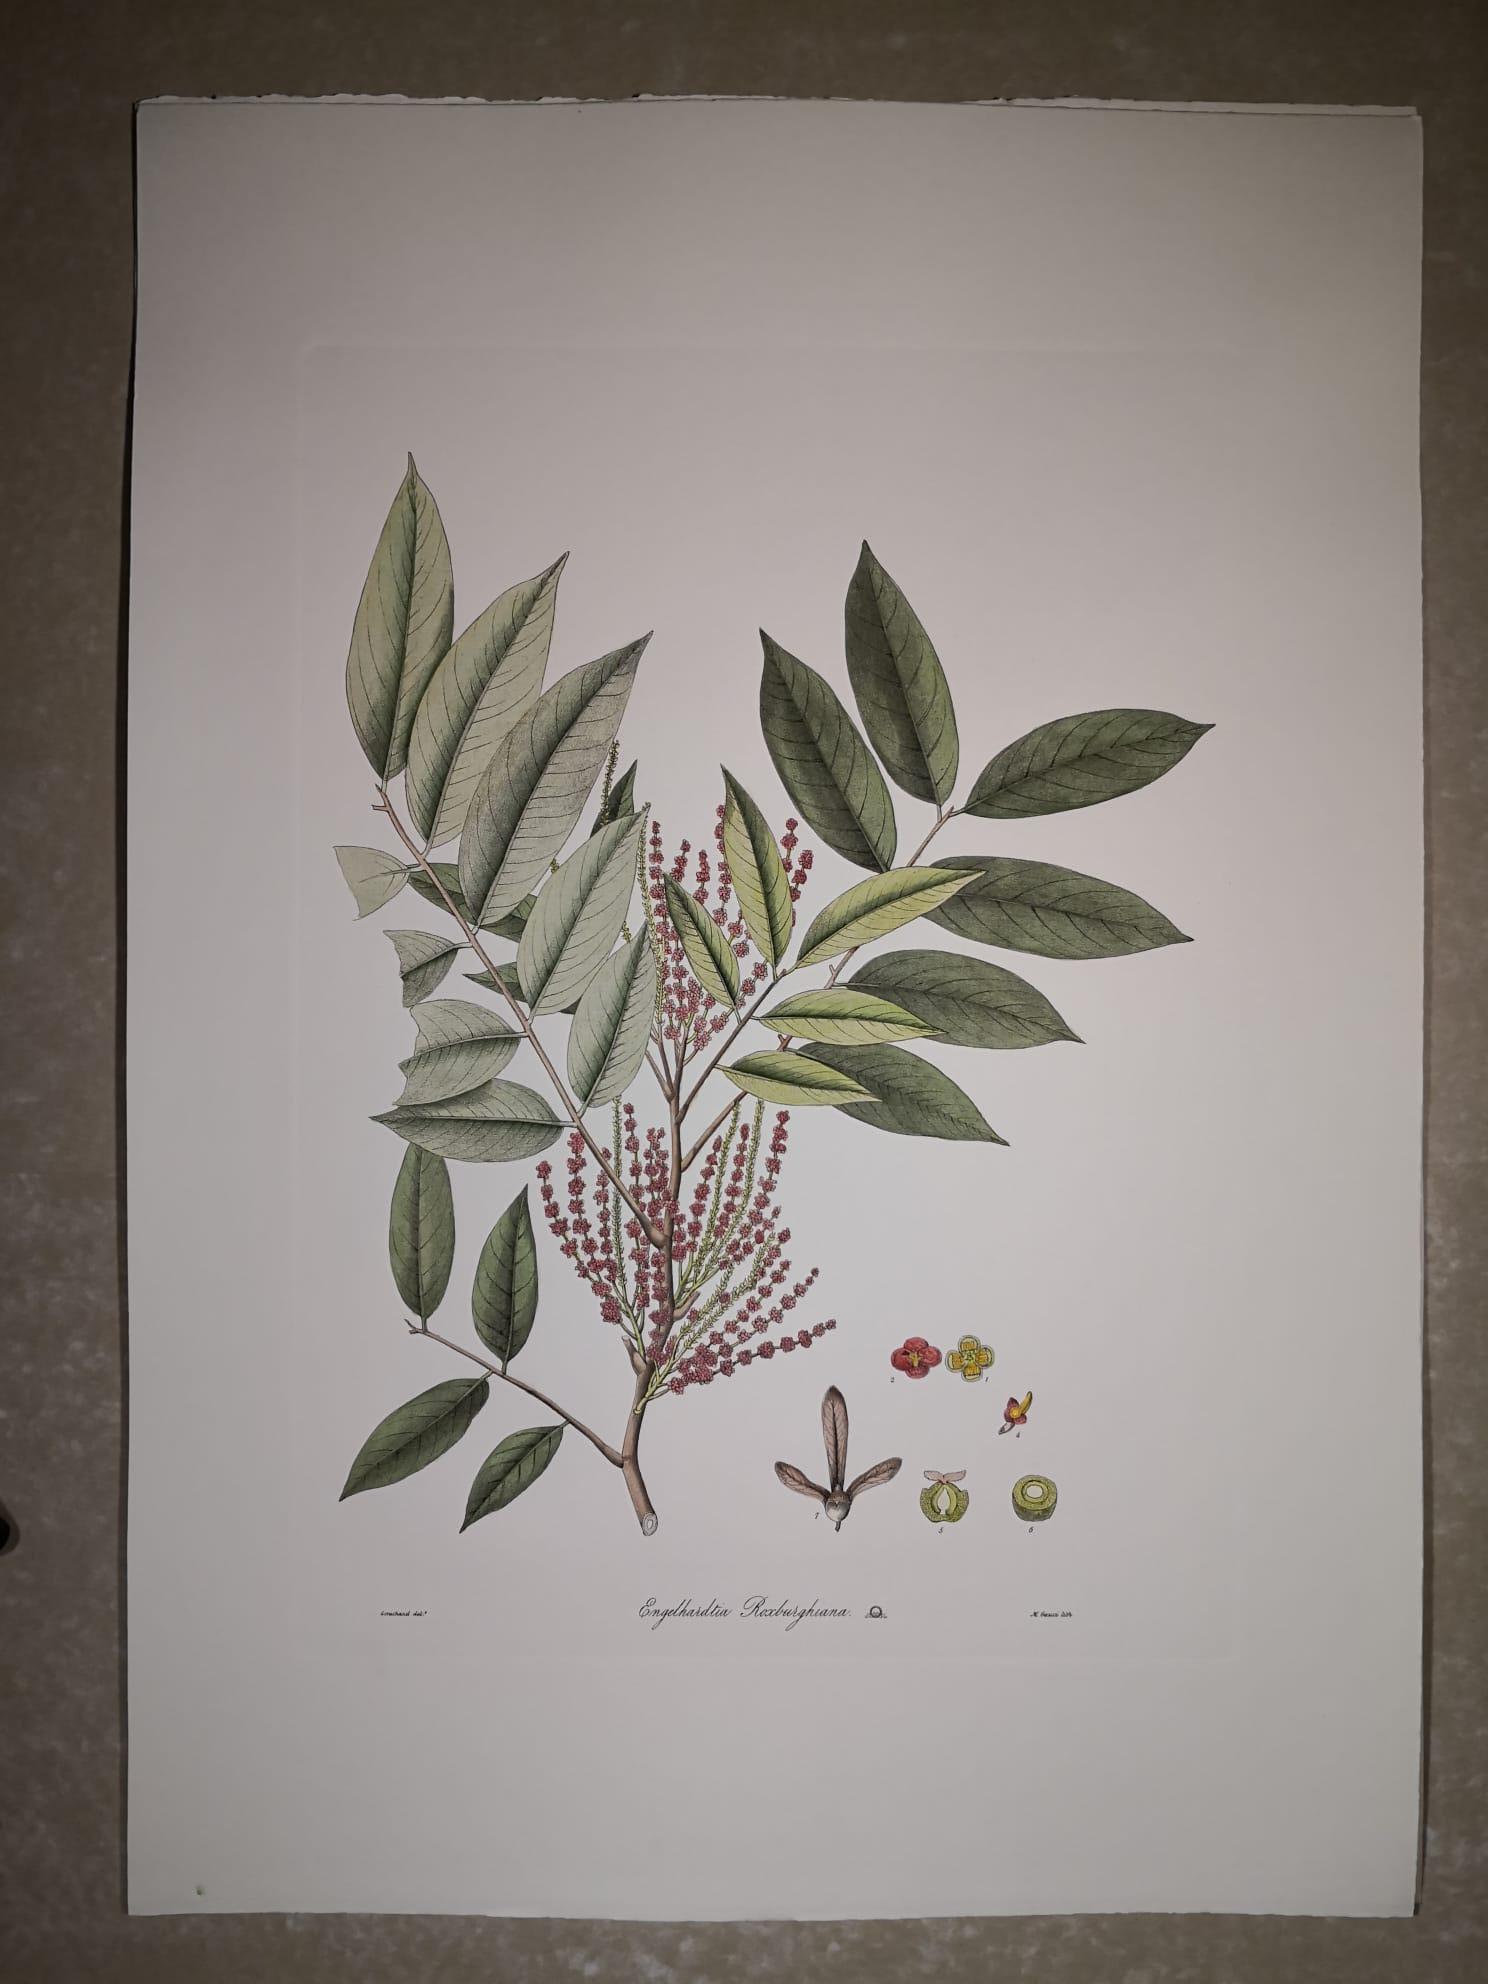 Elegant hand-watercoloured print representing Imperatoria Ostruthium, a flowering plant belonging to the family Apiaceae. 

This botanical style print is available in 4 different natural representations to create a bright and joyful